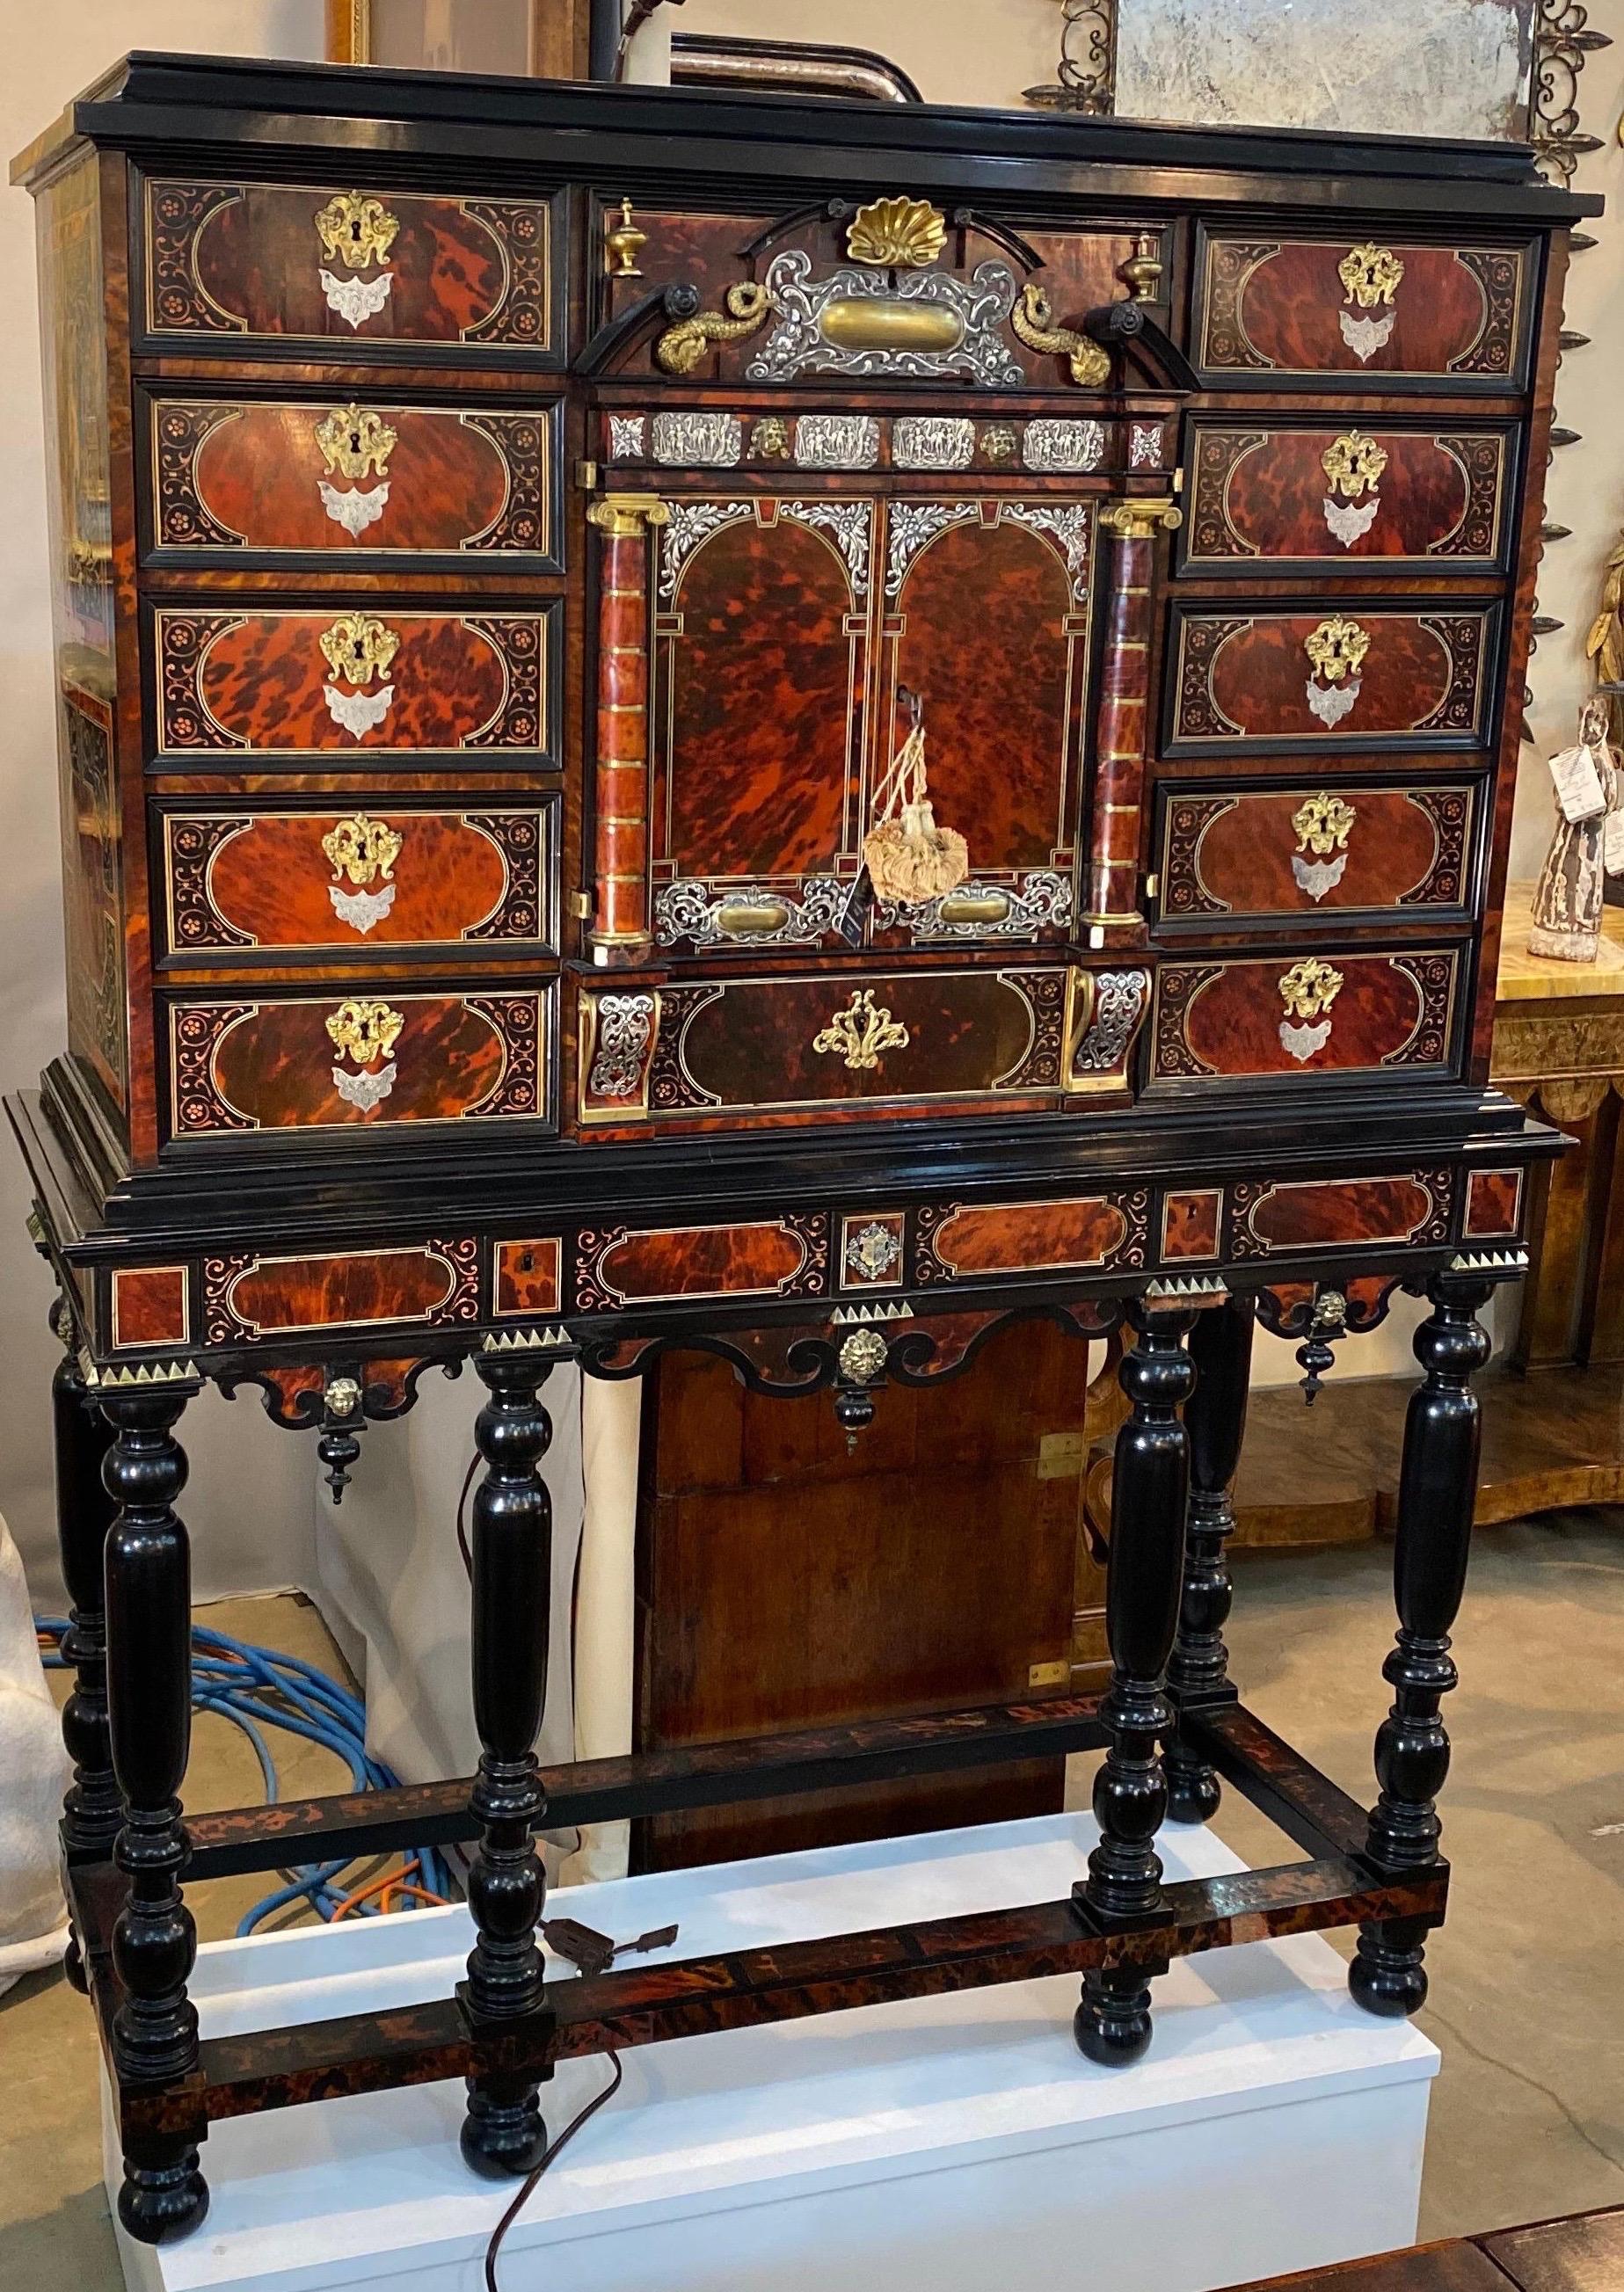 Incredible two piece 19th century Continental tortoiseshell and silver collectors cabinet on stand or vargueno. Likely Portuguese. 

Amazing quality with tortoiseshell drawers, tortoiseshell columns, bronze capitals, silver and bronze mounts,